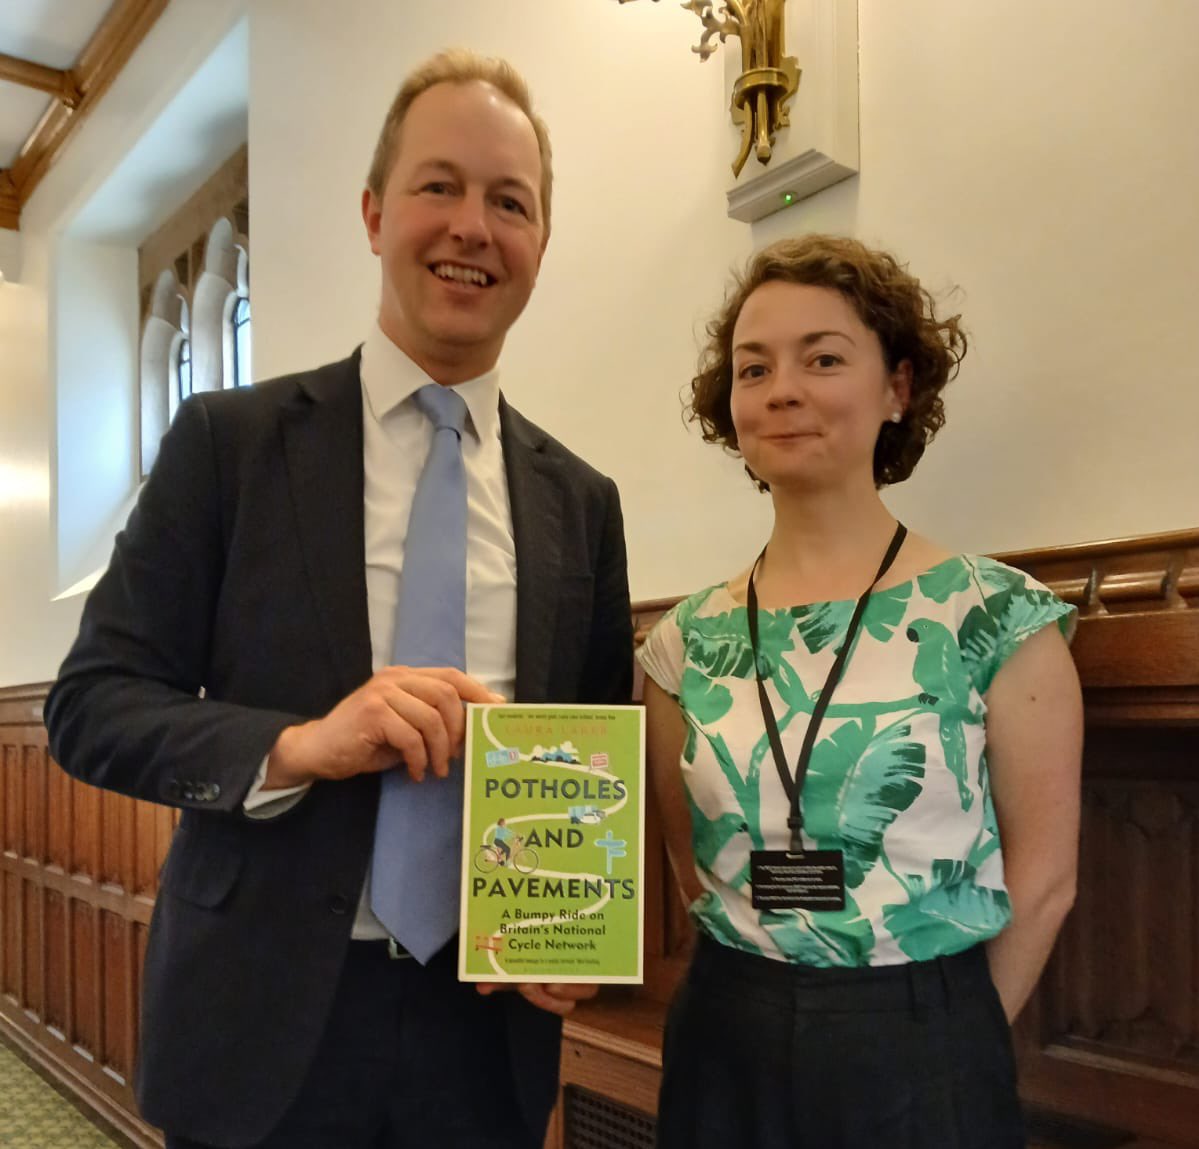 It was my great pleasure to meet Laura Laker, author of 'Potholes and pavements' in Parliament yesterday. Laura has written about the development of the National Cycle Network - although with a title like that, it could easily have been a history of Community Politics!